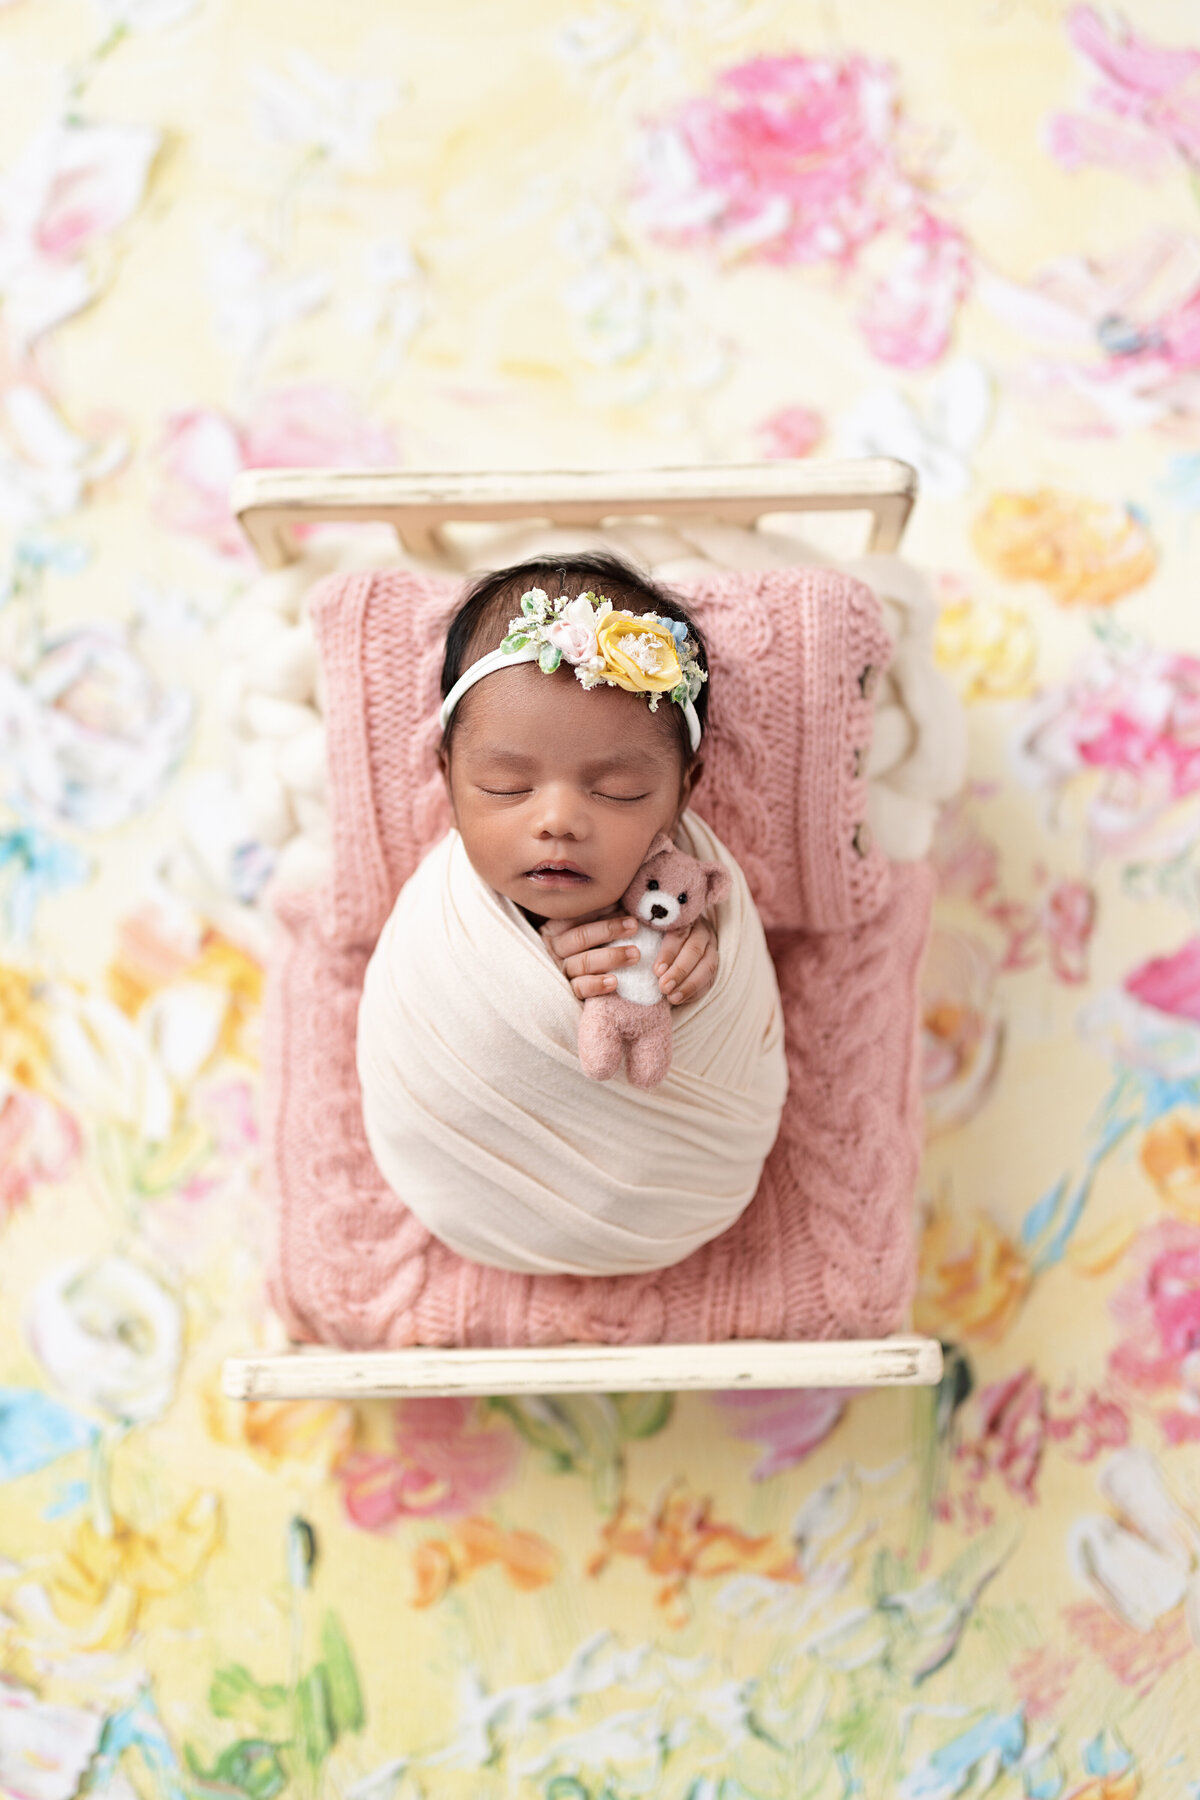 Bed (fully wrapped) - 2022-04-12 - Maya's Newborn Session - 13 days (Vanessa Parasram)105